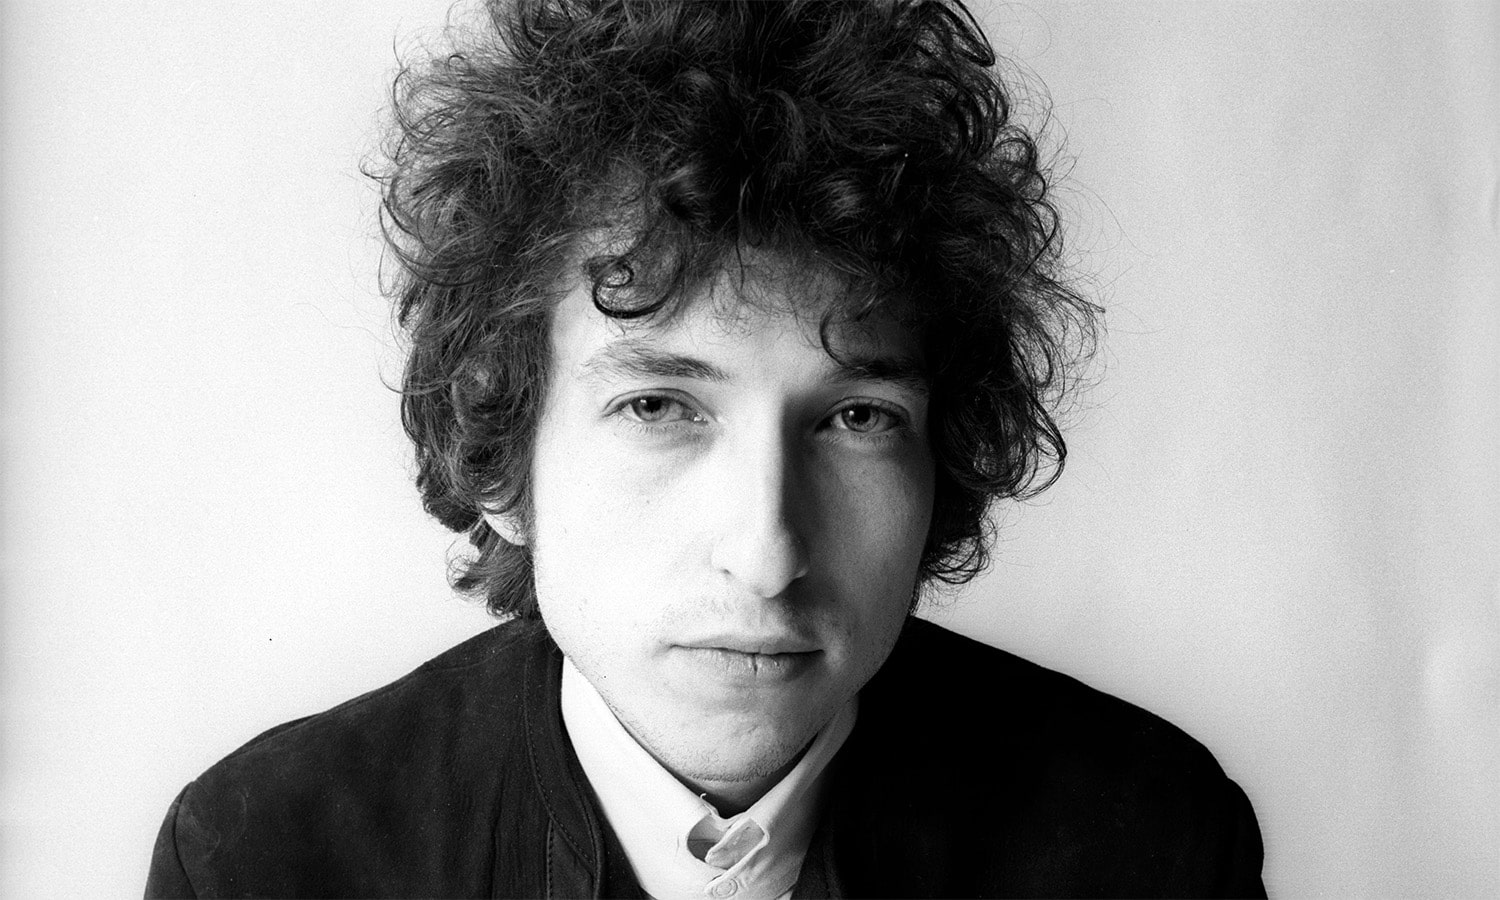 30 interesting facts about Bob Dylan